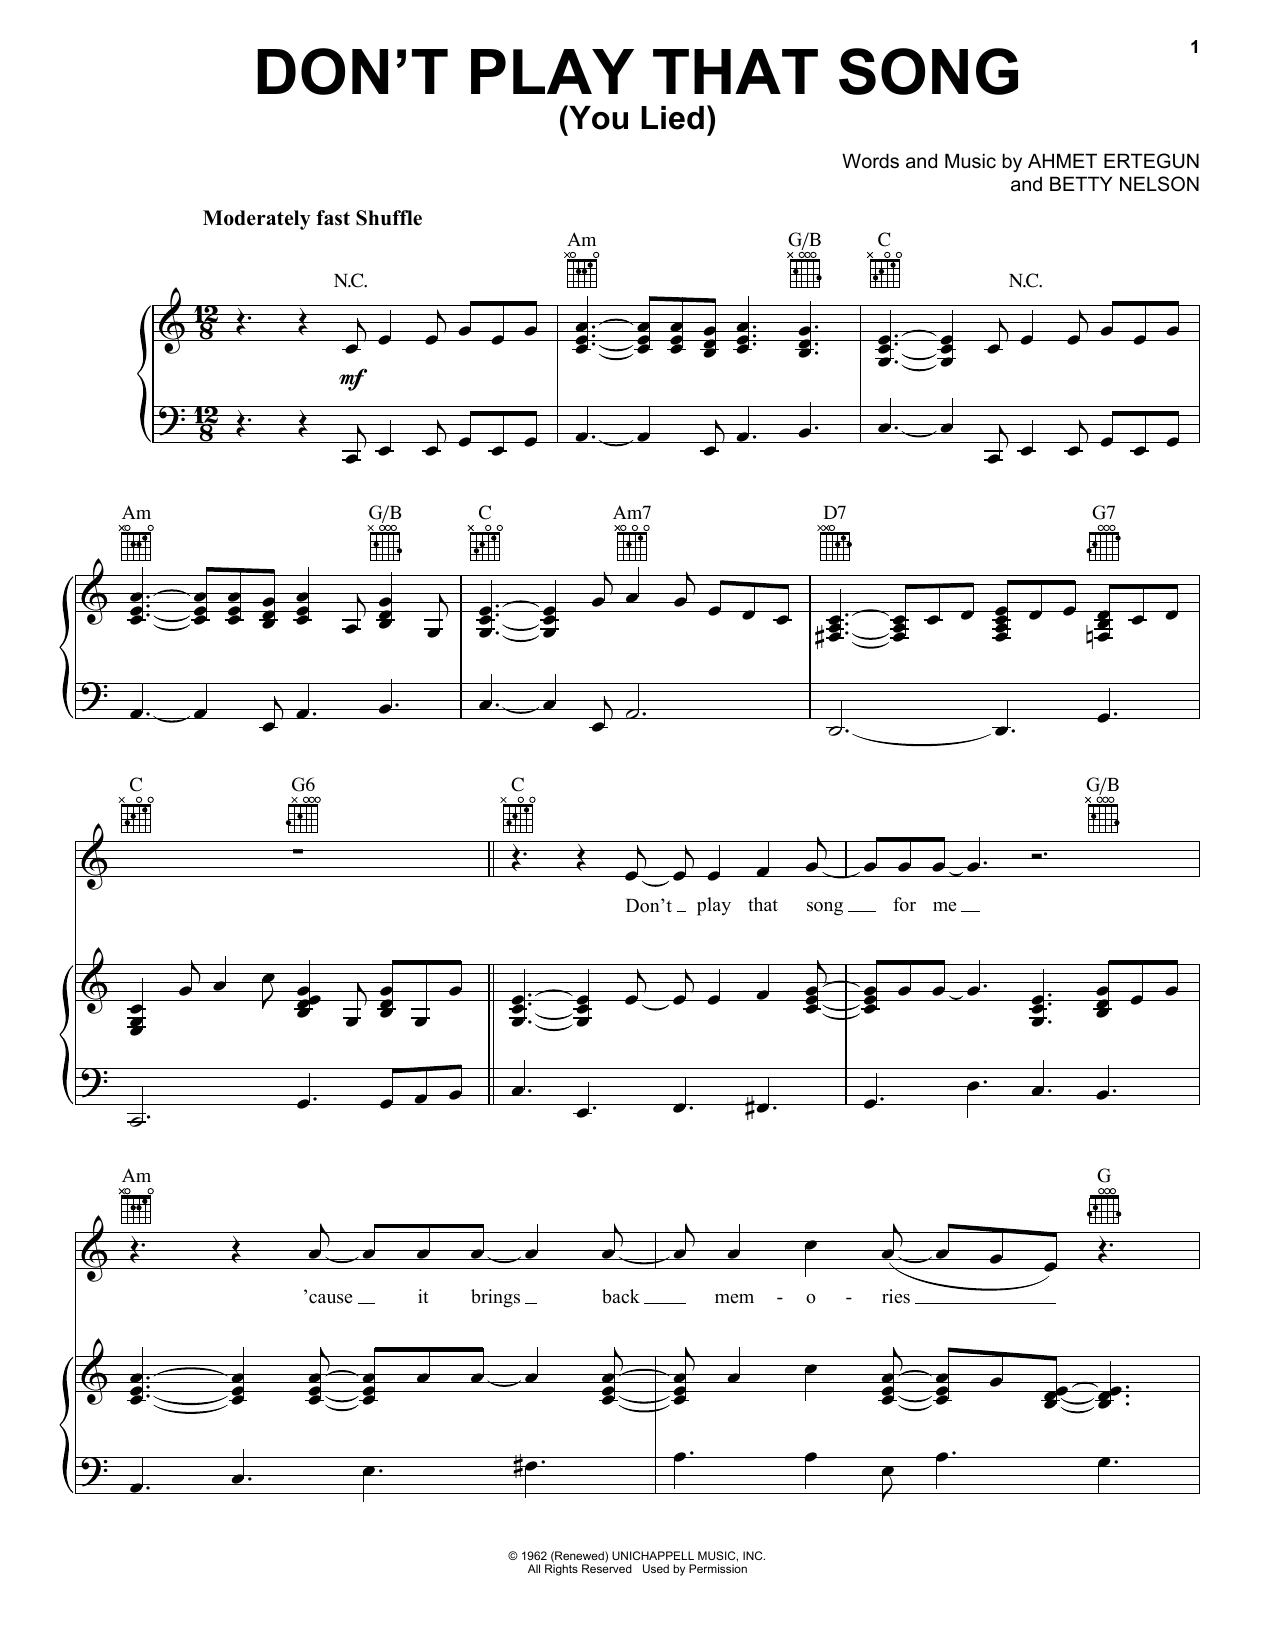 Download Aretha Franklin Don't Play That Song (You Lied) Sheet Music